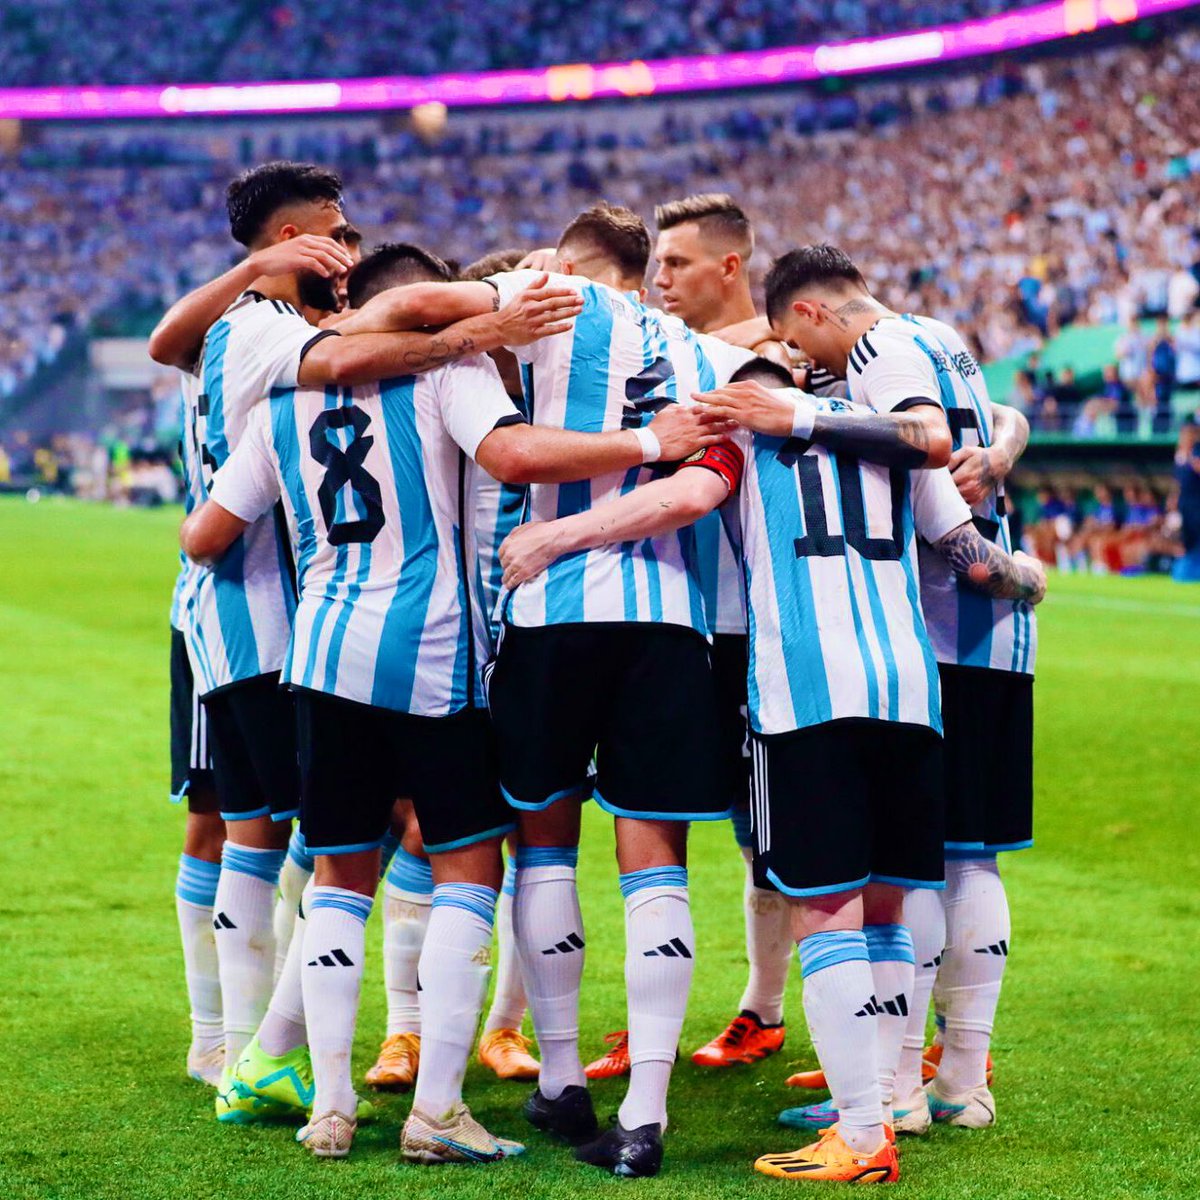 #Argentina have lost only one of their last 49 matches. 😱🇦🇷

The only defeat was against #SaudiArabia  during the #2022WorldCup.

#Messi #Alvarez